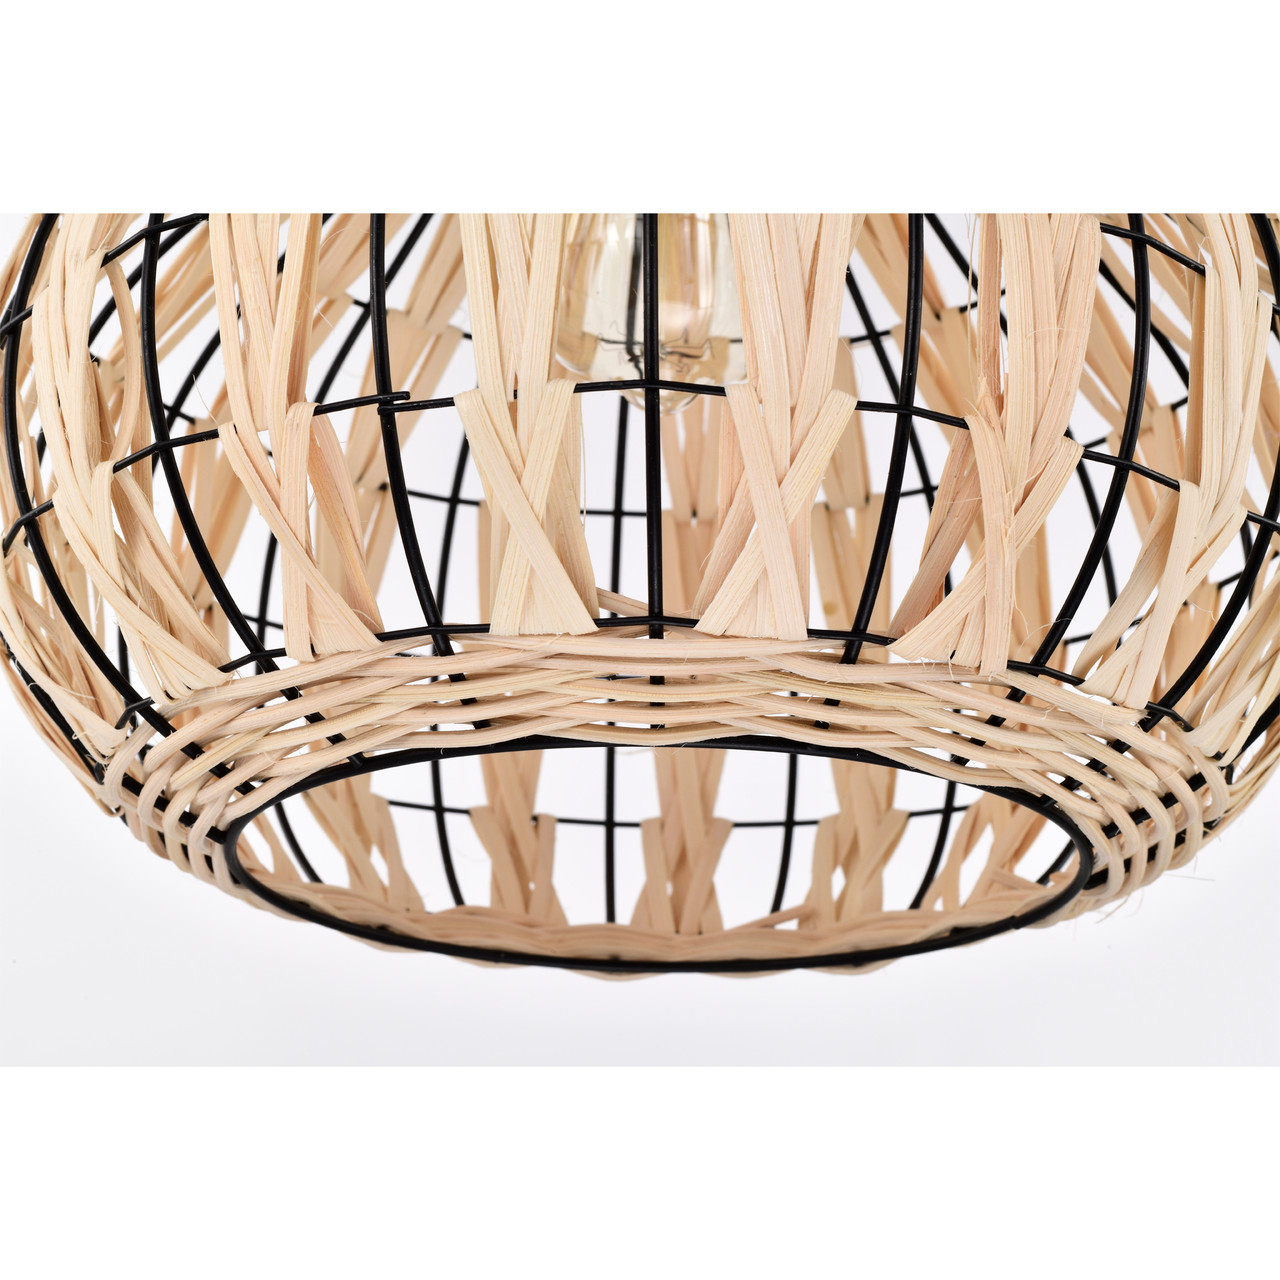 WAREHOUSE OF TIFFANY'S MD57/1 Zilpah 12 in. 1-Light Indoor Matte Black and Woven Rattan Finish Pendant with Light Kit